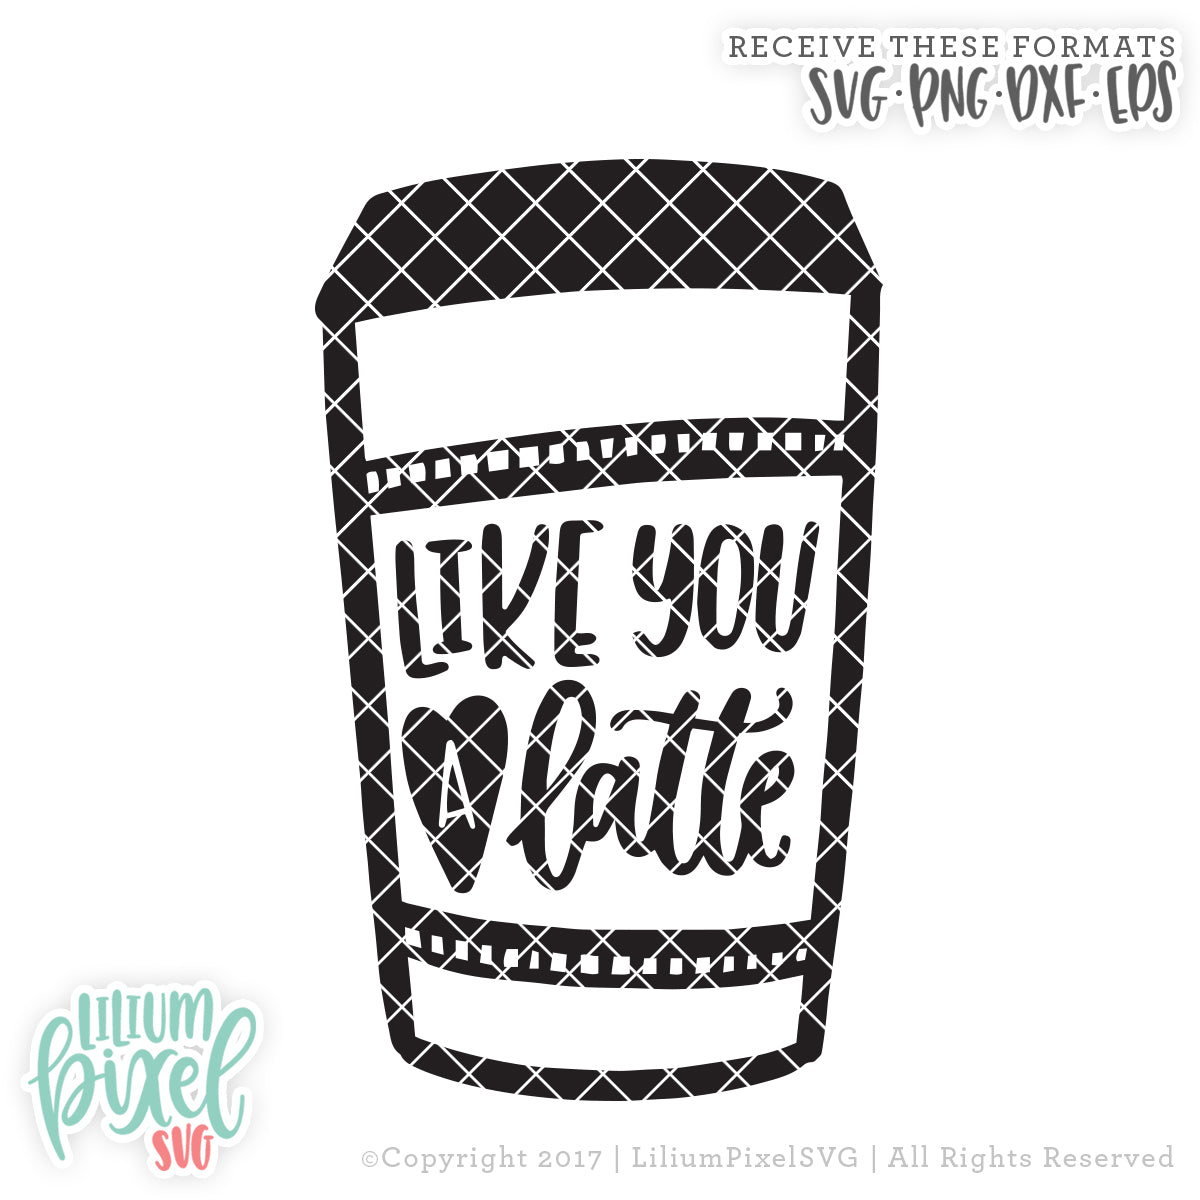 Like You A Latte - SVG PNG DXF EPS Cut File • Silhouette • Cricut • More